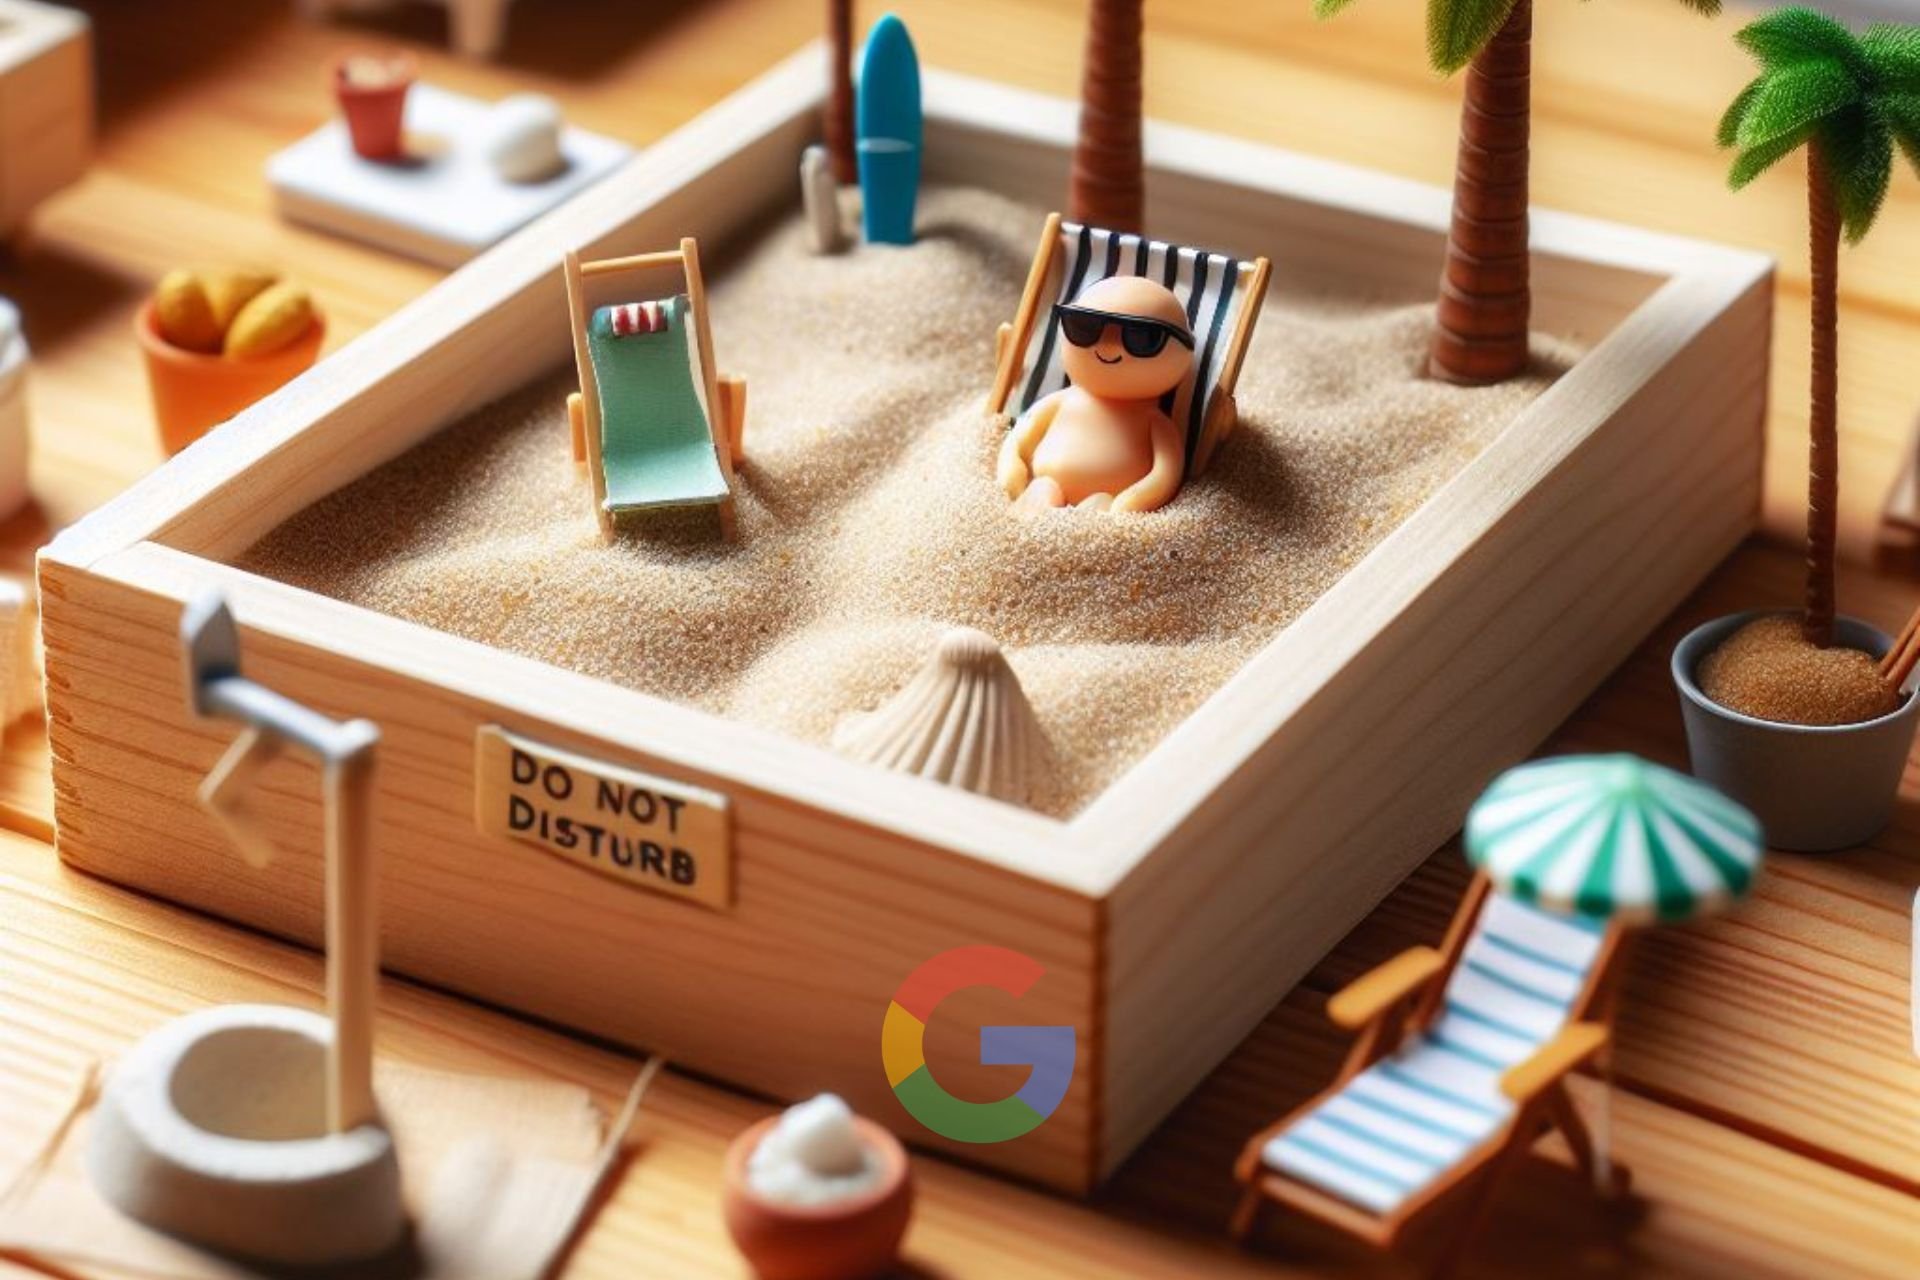 Google Privacy Sandbox will change advertising by removing cookies